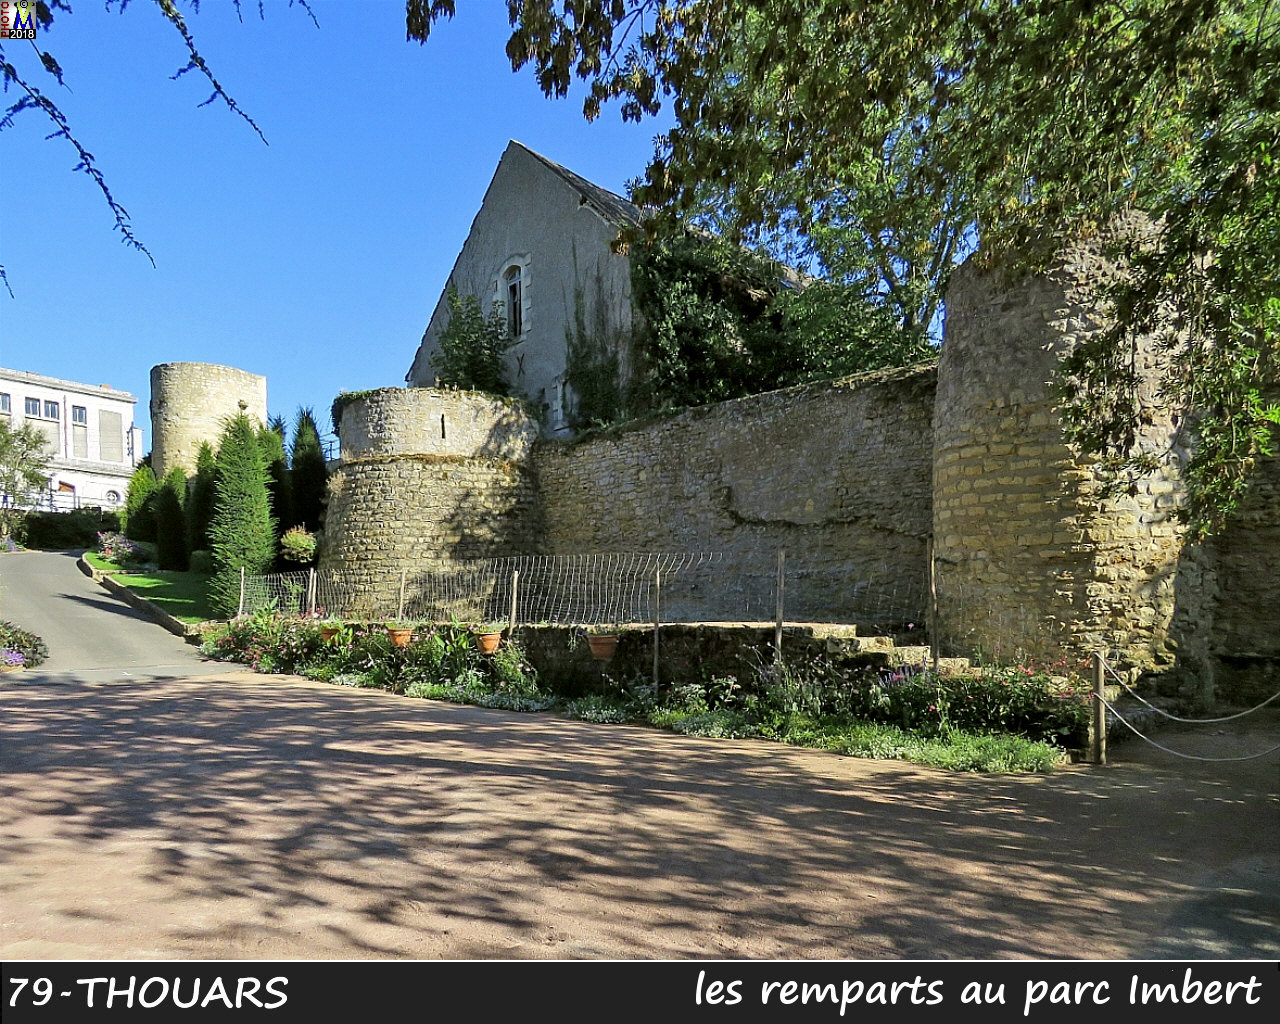 79THOUARS_remparts_1002.jpg